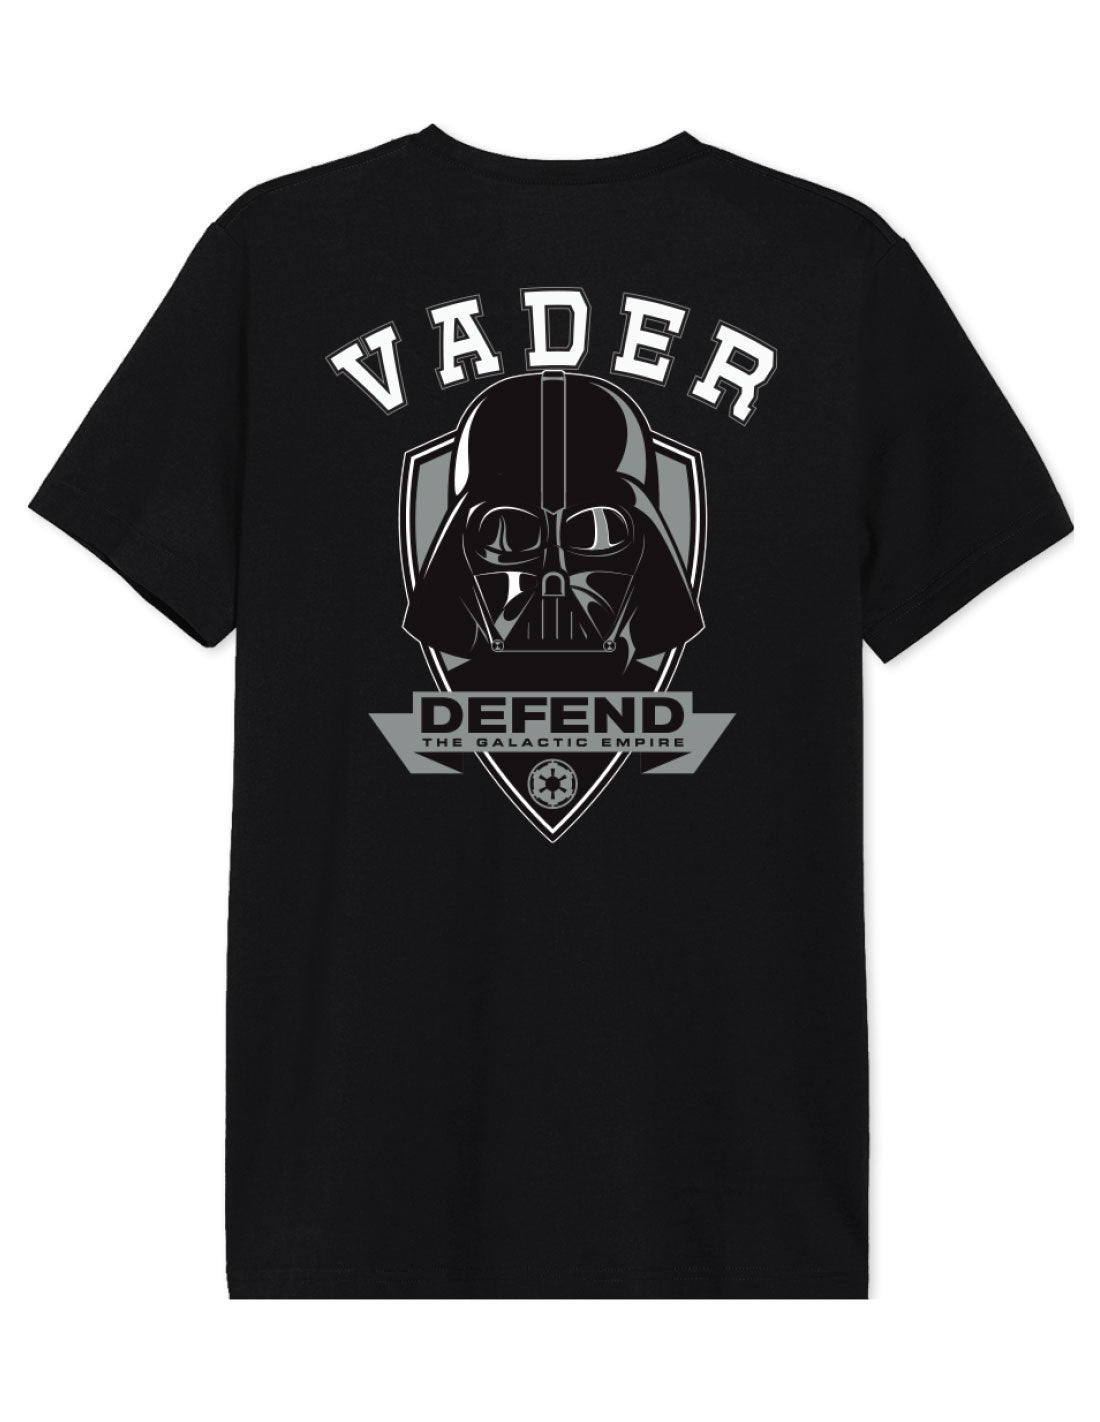 Star Wars t-shirt - Defend the Galactic Empire